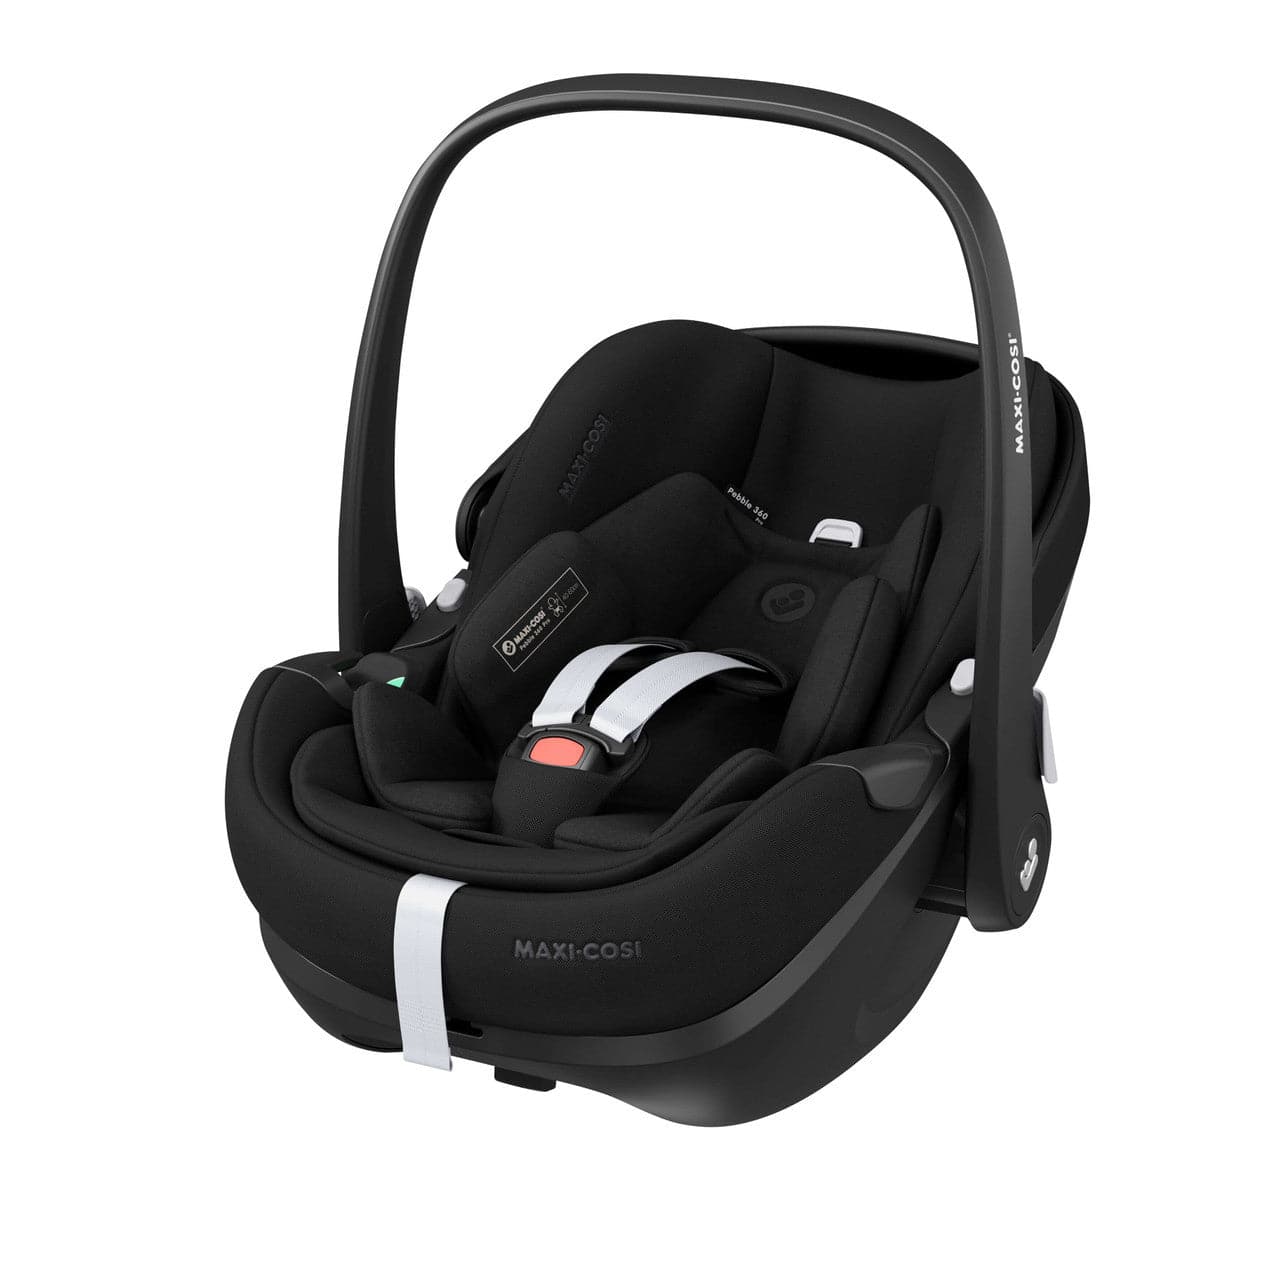 Egg® 2 Luxury Pebble 360 Pro i-Size Travel System Bundle - Mink -  | For Your Little One